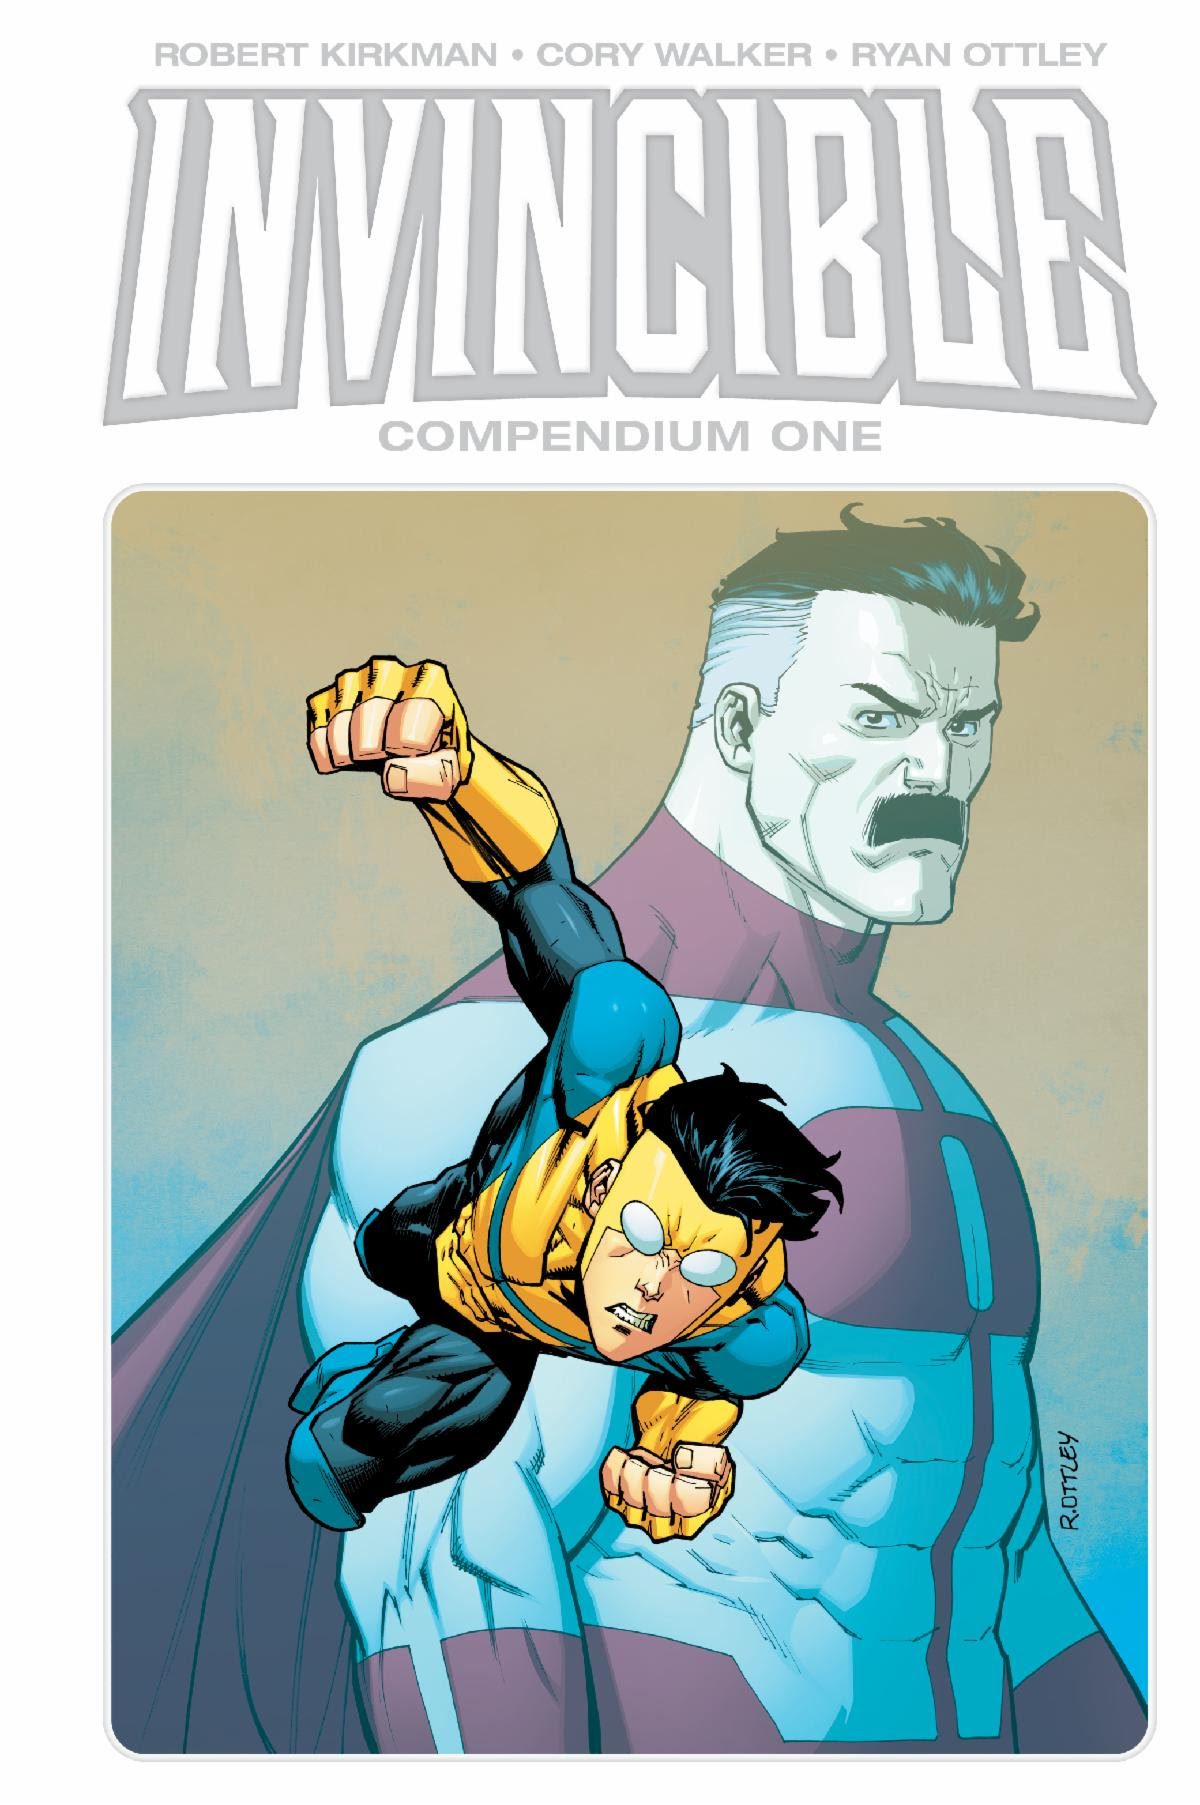 Invincible - First 3 Volumes - Trade Paperback Bundle – Skybound  Entertainment